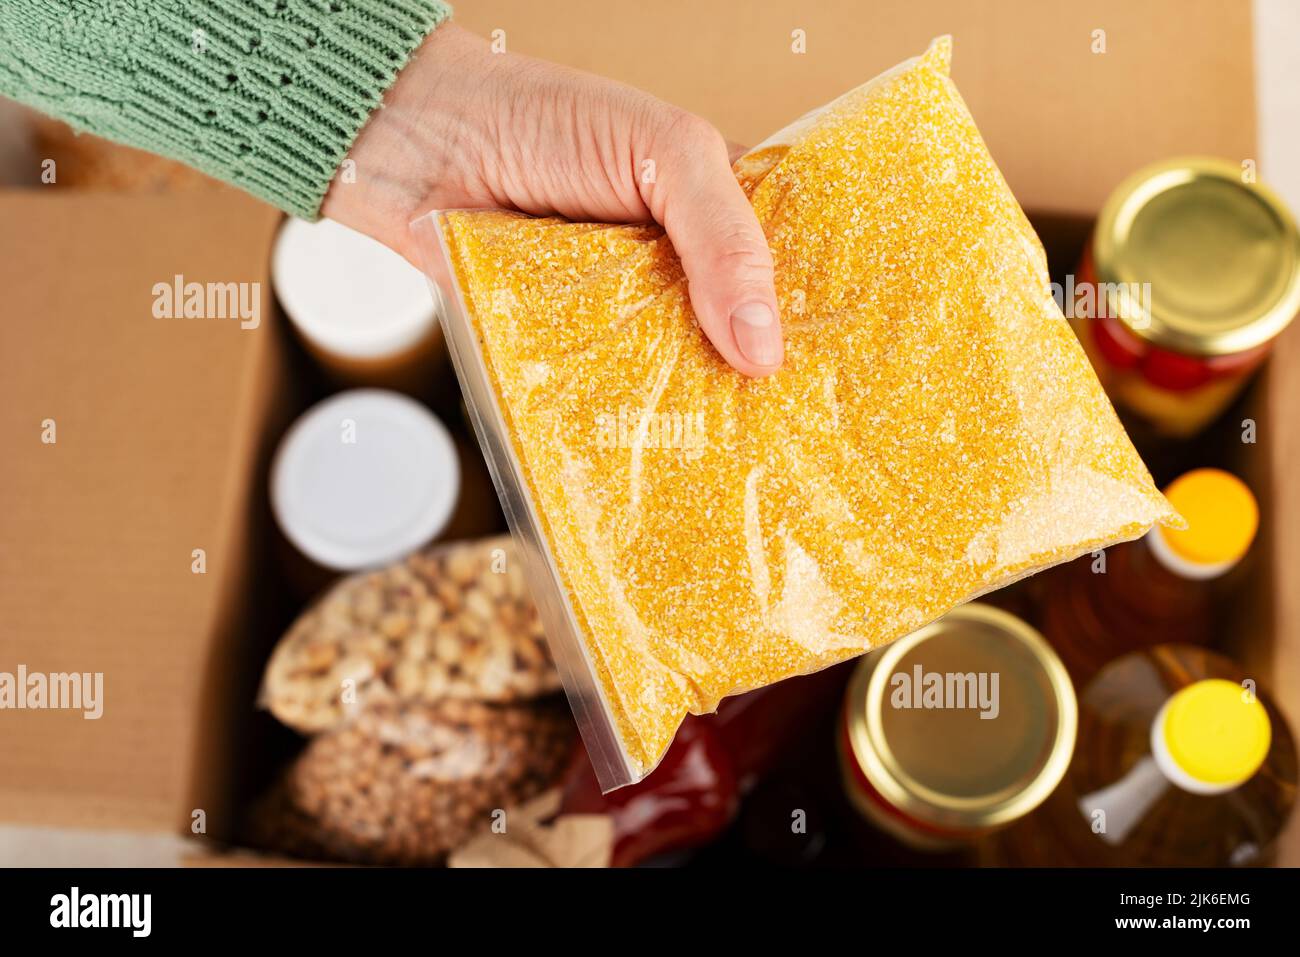 Plastic container with corn grits in female hand on emergency food box background Stock Photo